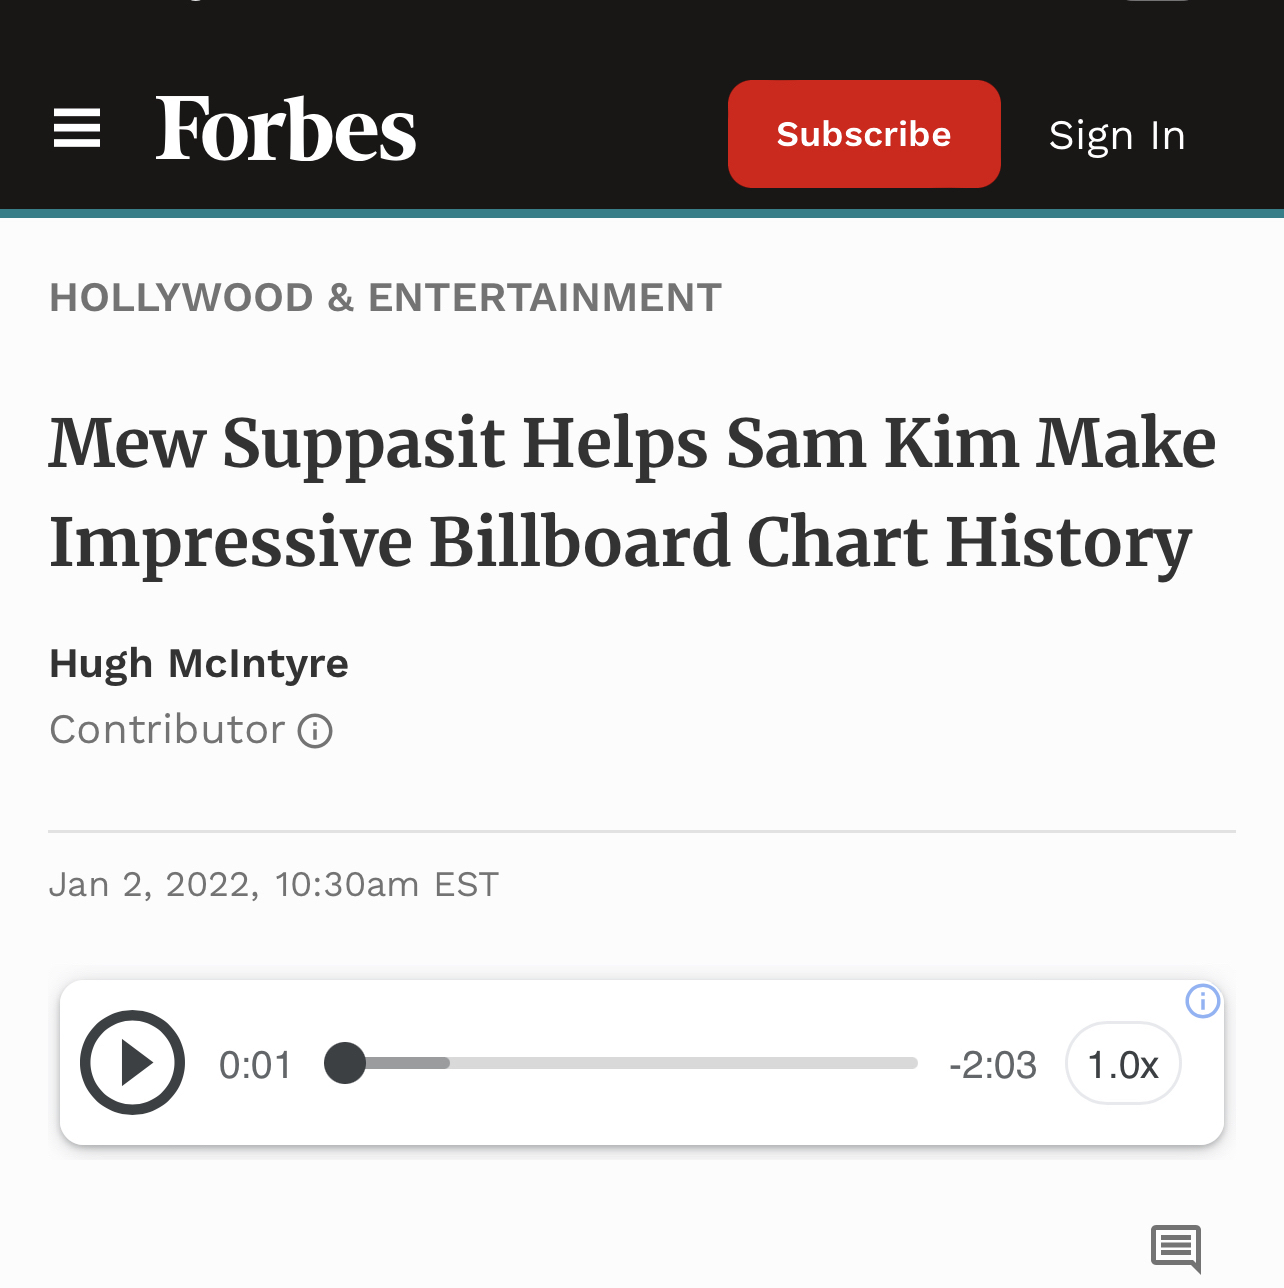 Forbes - Jan 2, 2022 (Before 4:30 She Said)